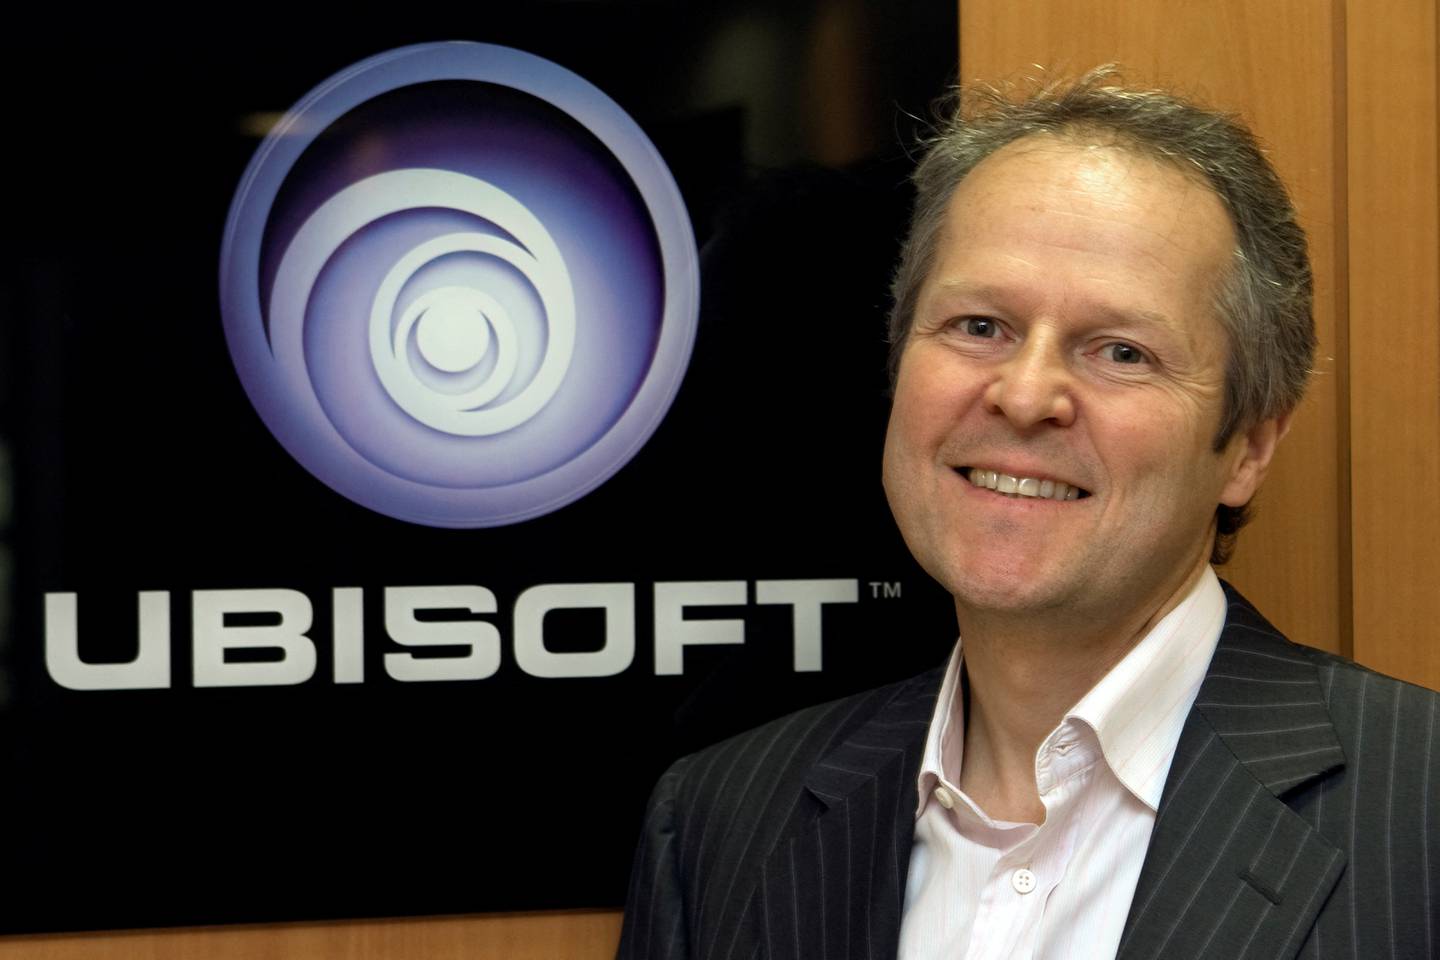 Ubisoft chief executive Yves Guillemot said the company was "surprised" by the underperformance of 2022's Mario + Rabbids: Sparks of Hope. Reuters